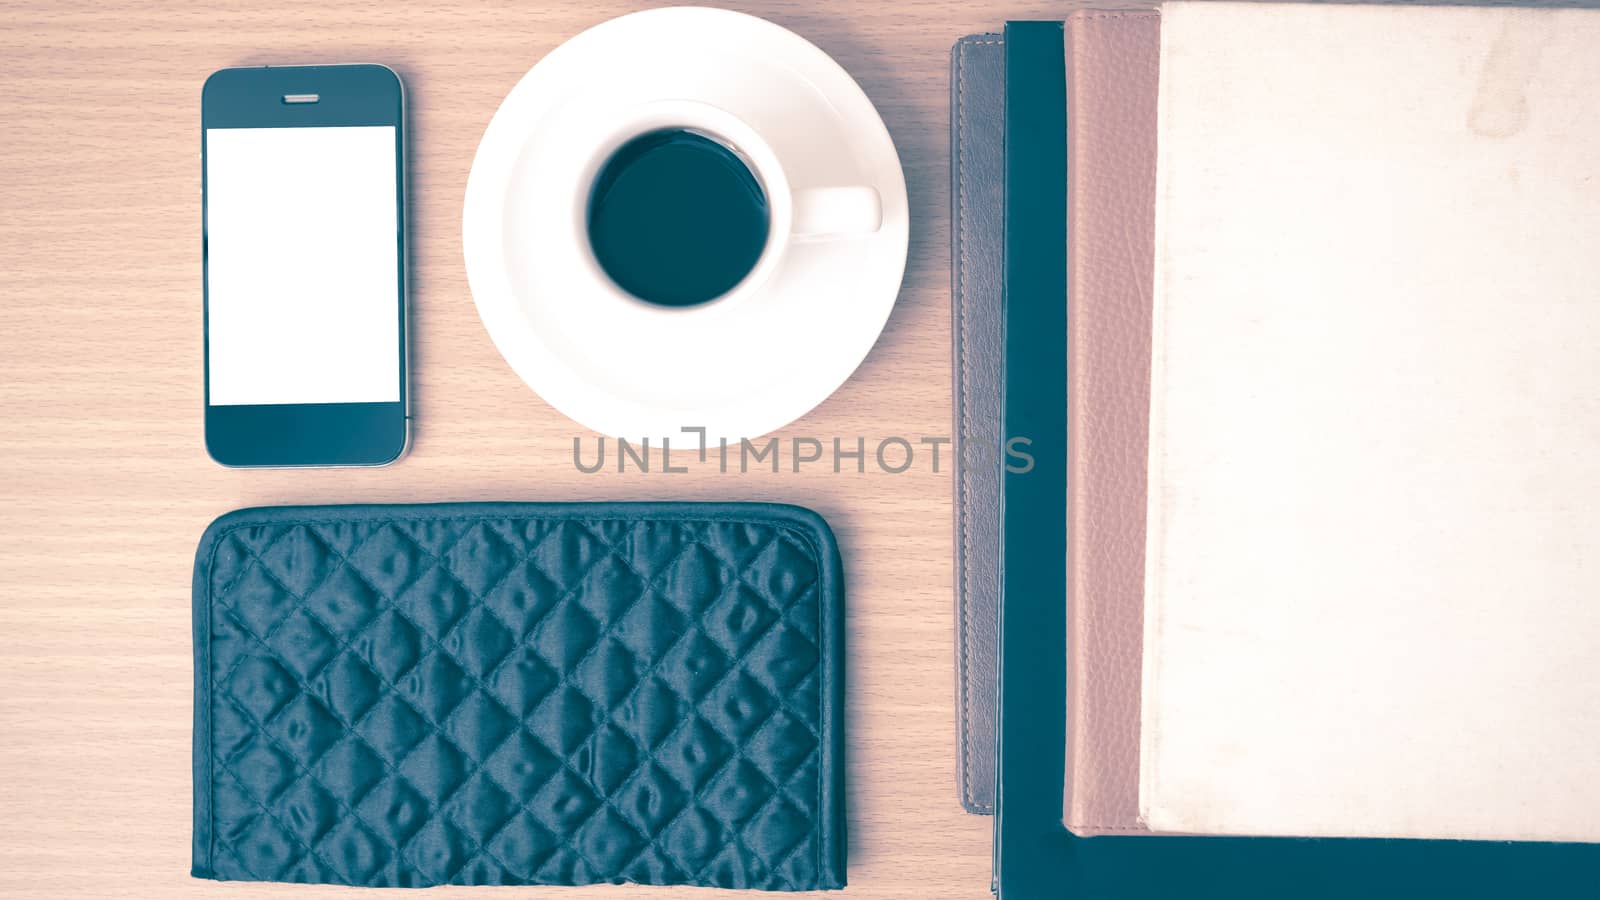 coffee,phone,stack of book and wallet on wood table background vintage style